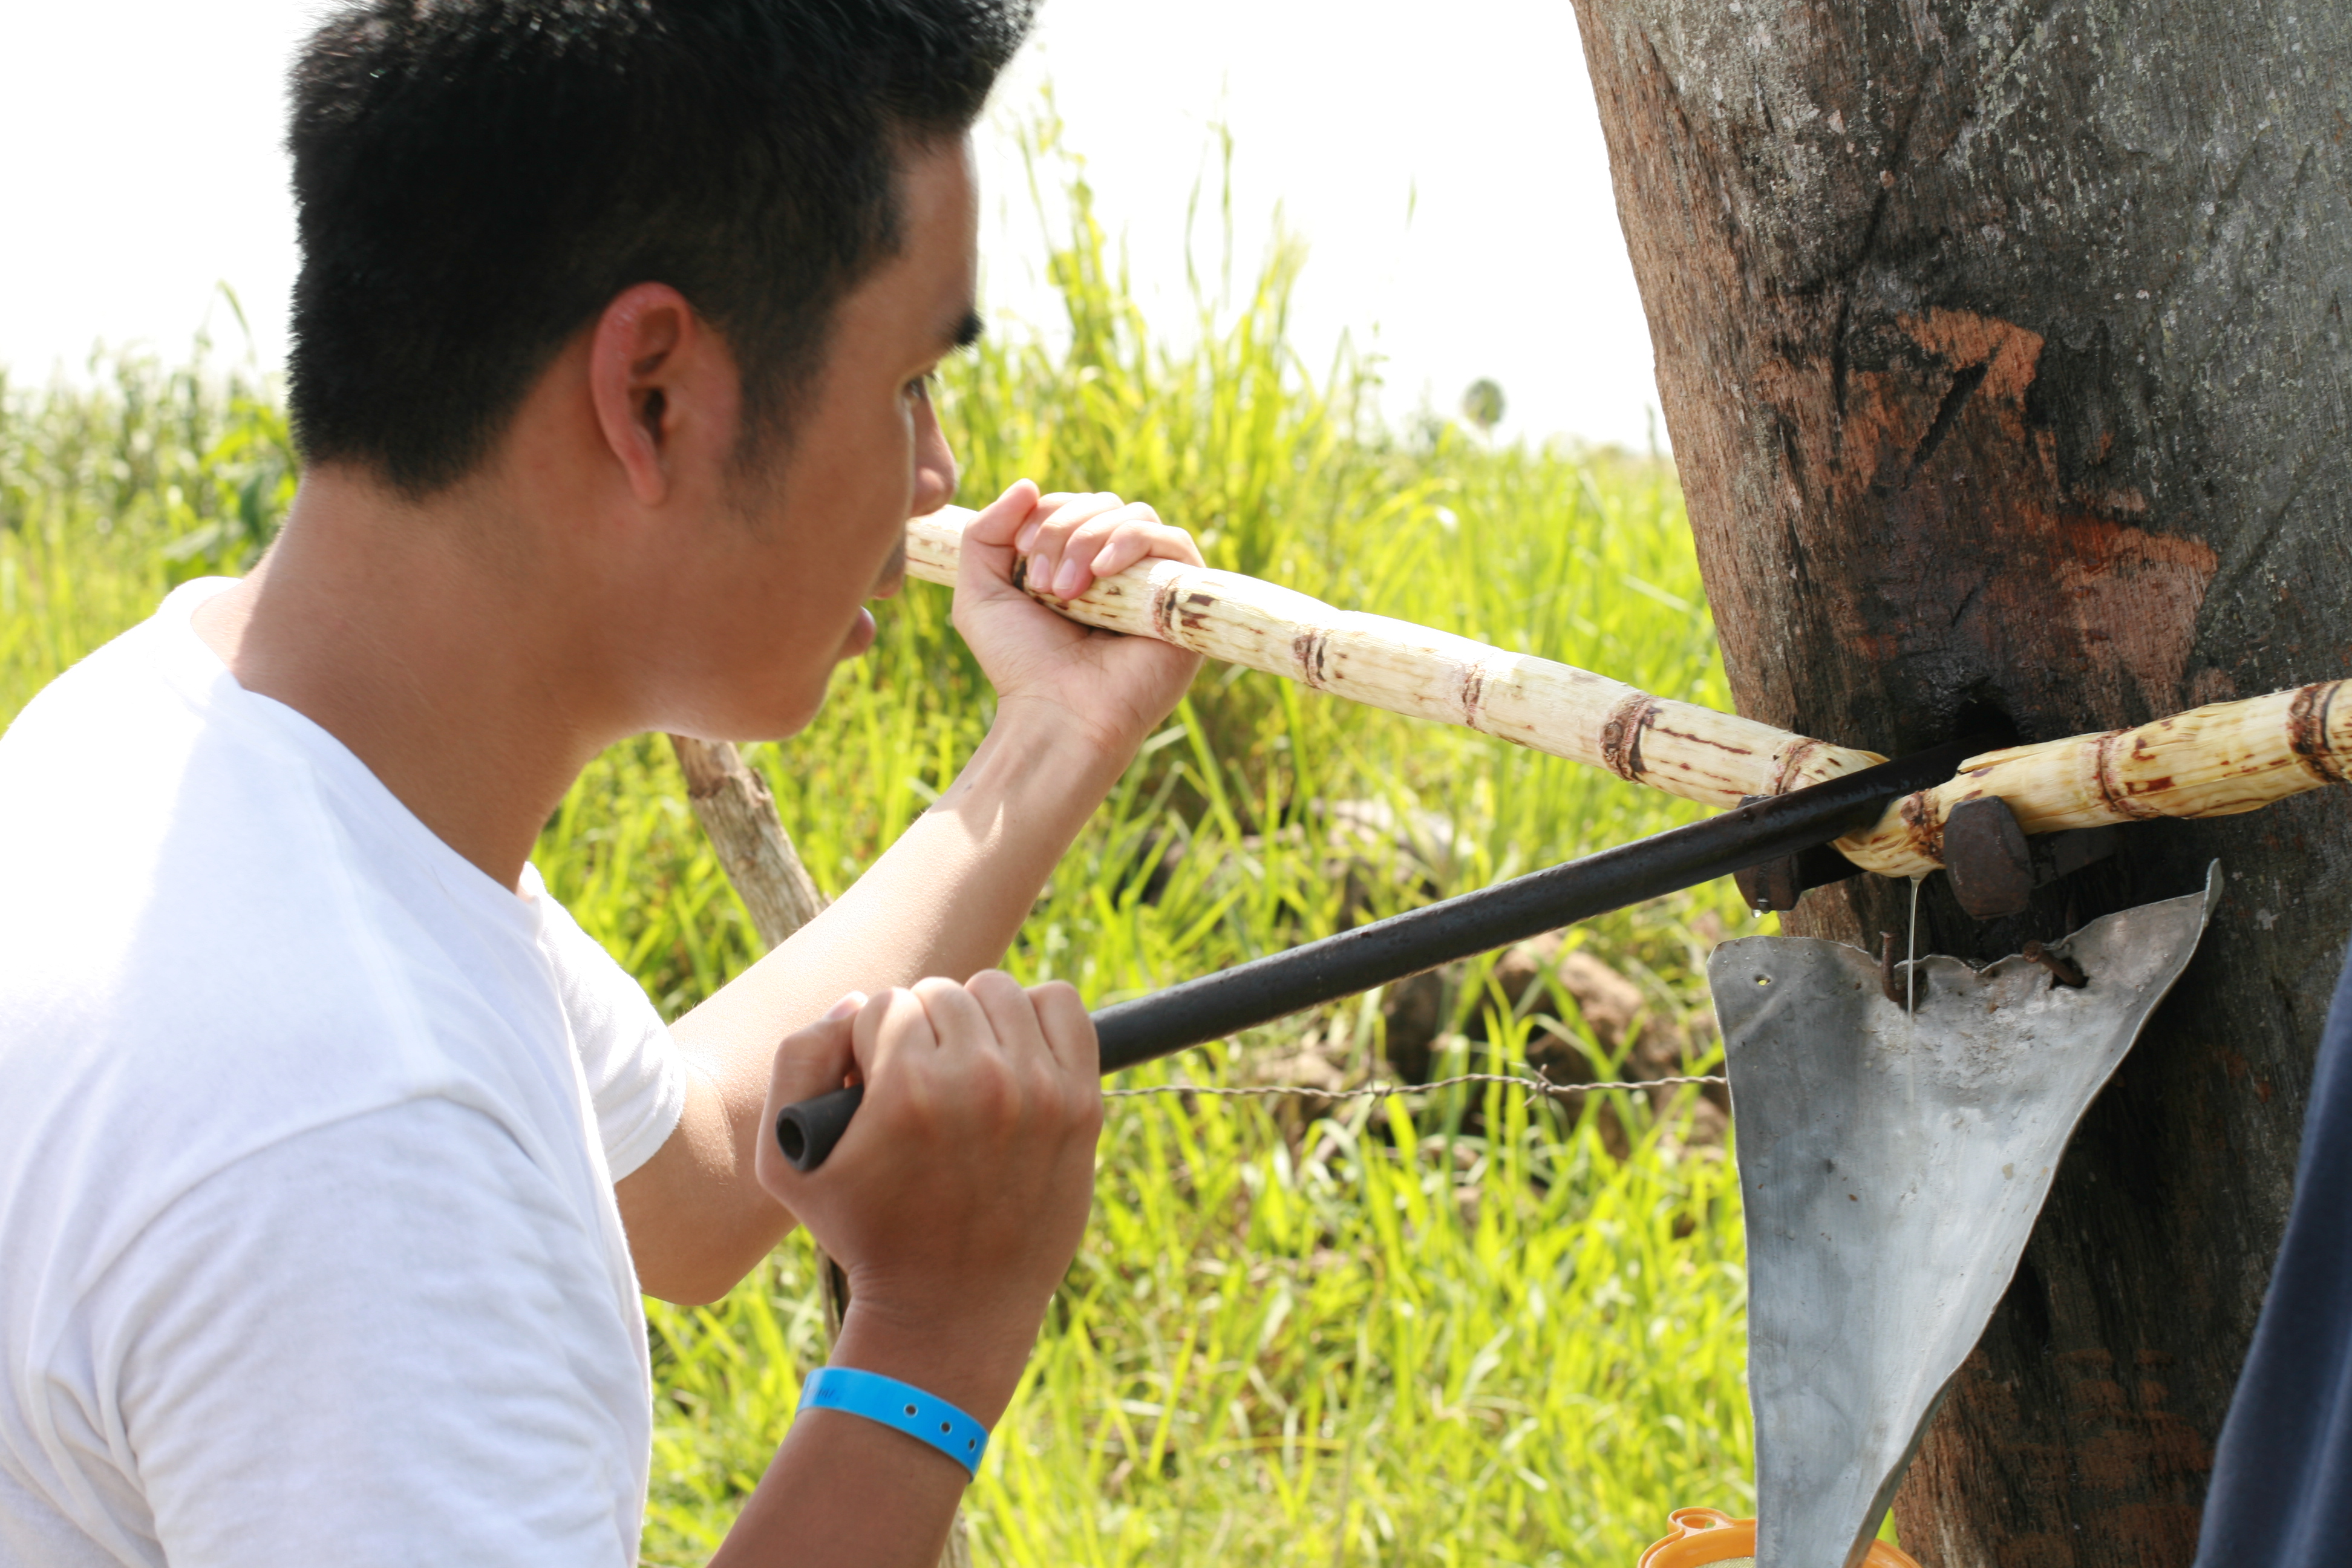 Manually extracting juice from sugarcane. Photo taken on August 1, 2007.